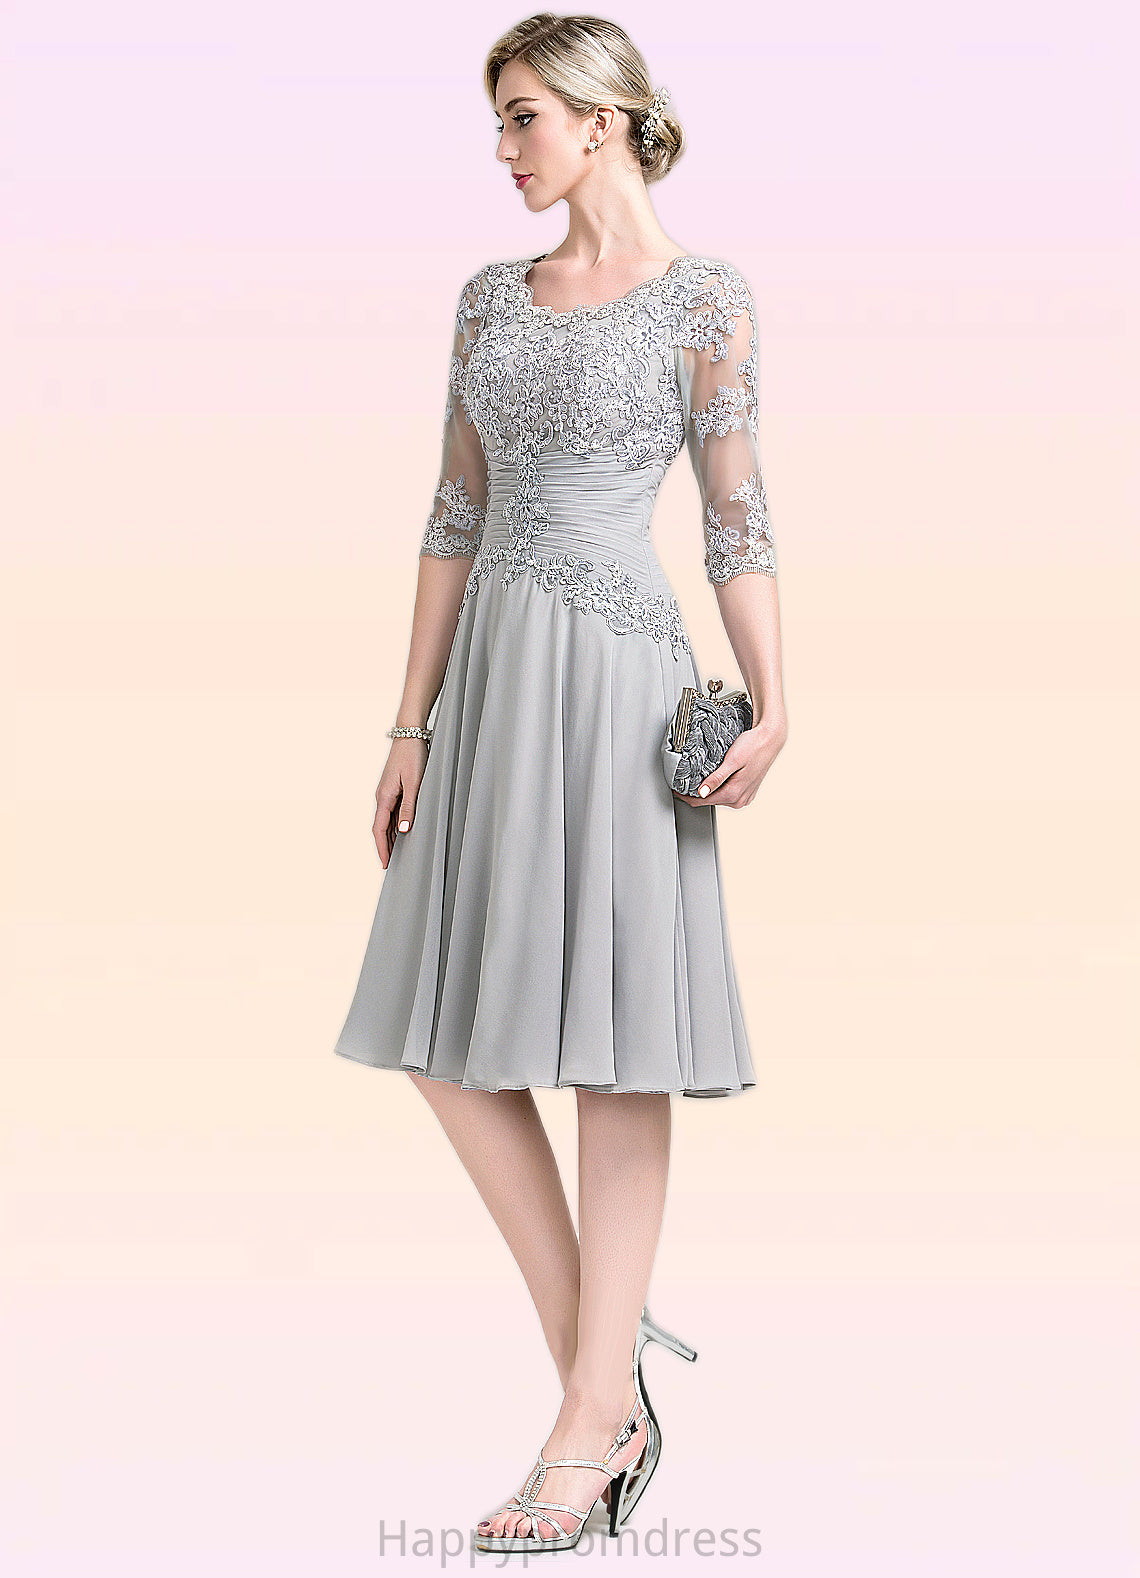 Isabella A-Line Scoop Neck Knee-Length Chiffon Mother of the Bride Dress With Ruffle Appliques Lace XXS126P0014715